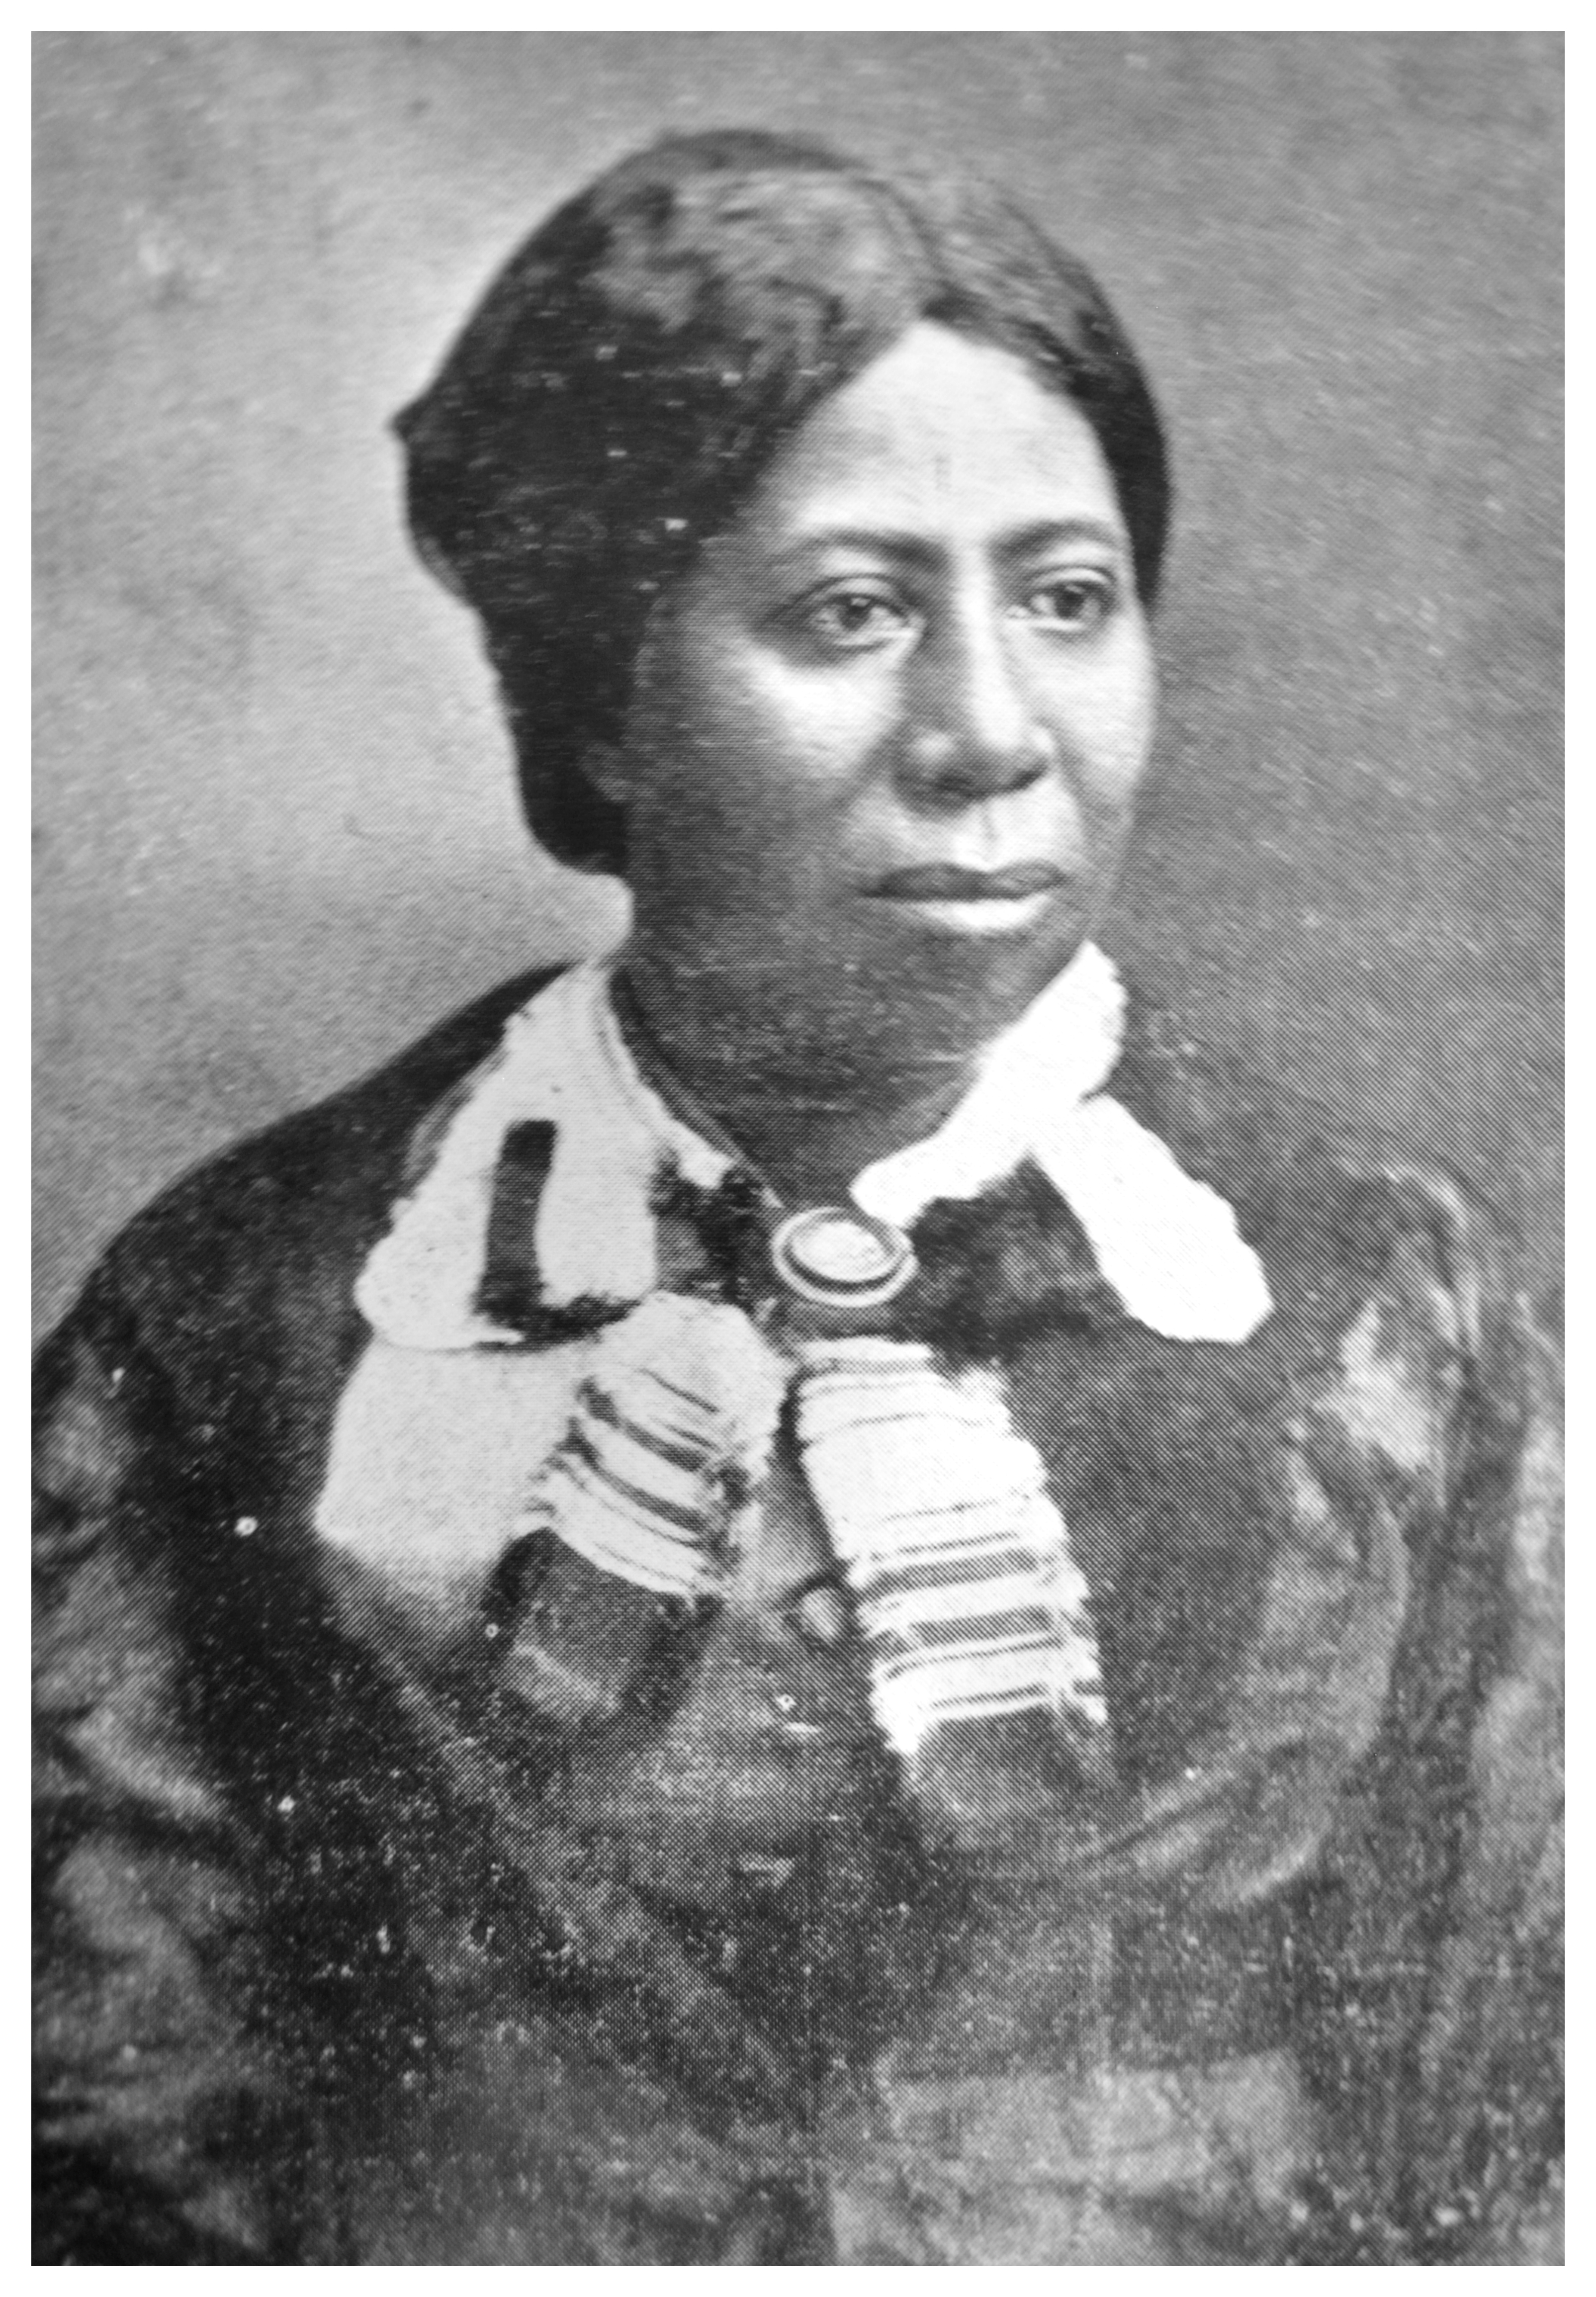 Anna Murray Douglass, abolitionist, activist of the Underground Railroad and first wife of abolitionist and Black civil rights leader Frederick Douglass, is shown in a photograph circa 1860.
From Wikimedia Commons, the free media repository.